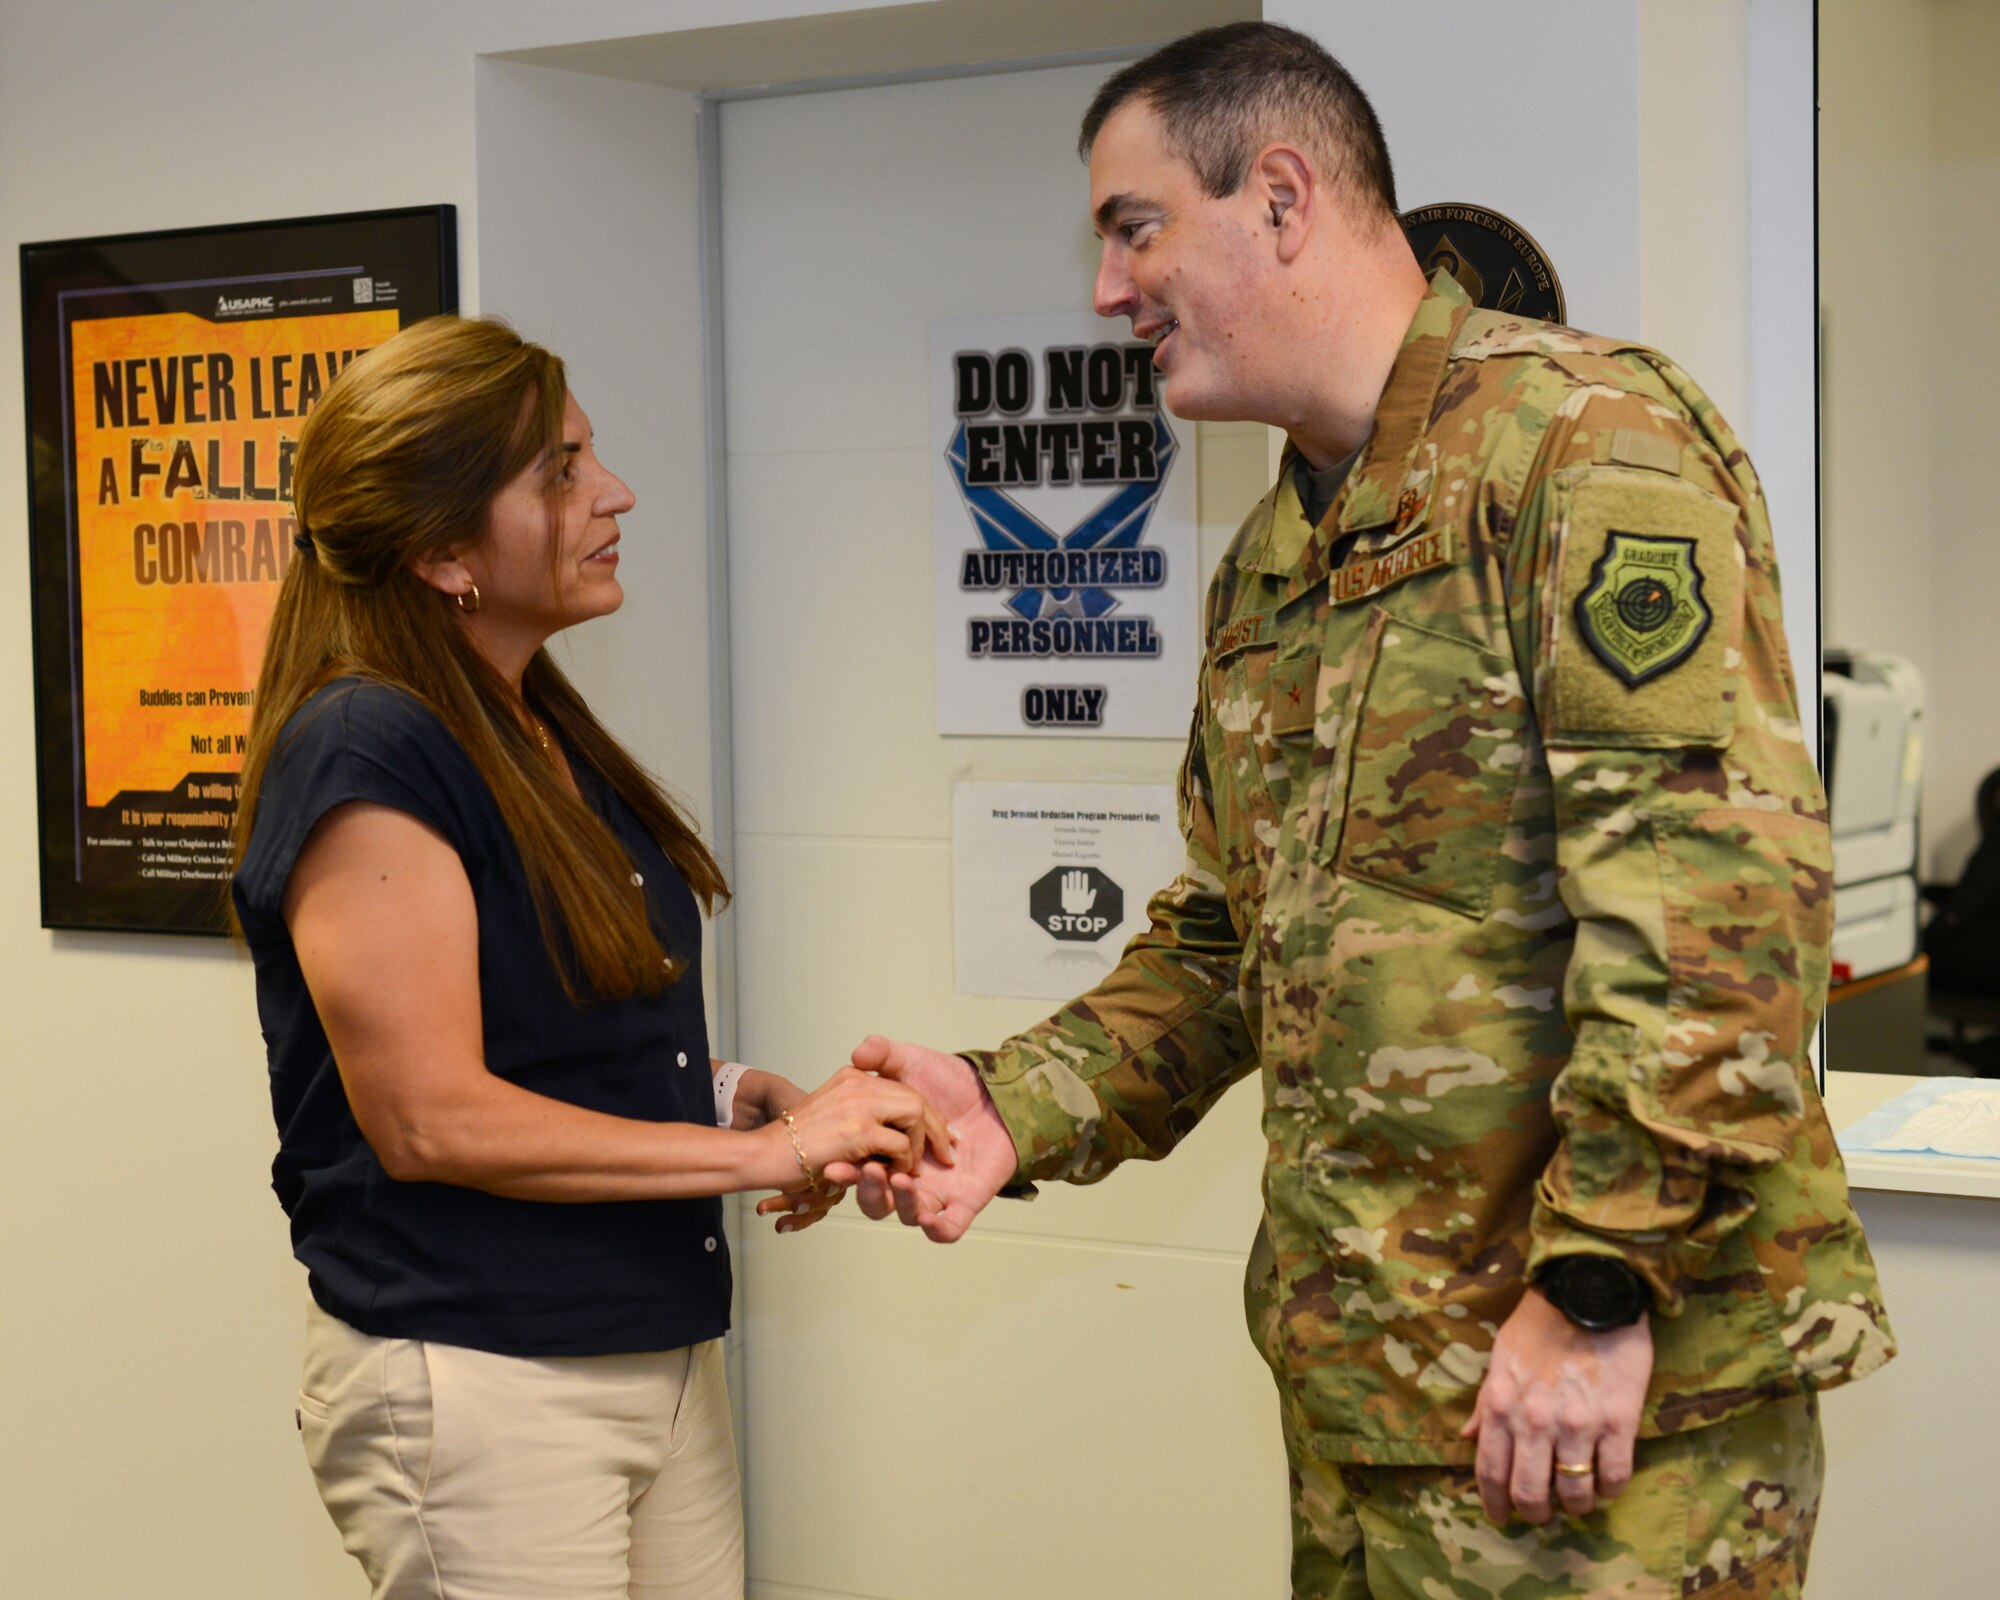 U.S. Air Force Brig. Gen. Mark R. August, 86th Airlift Wing commander, shakes hands with Yessica Sutton, the drug testing program administrative manager on Ramstein Air Base, Germany, May 30, 2019.